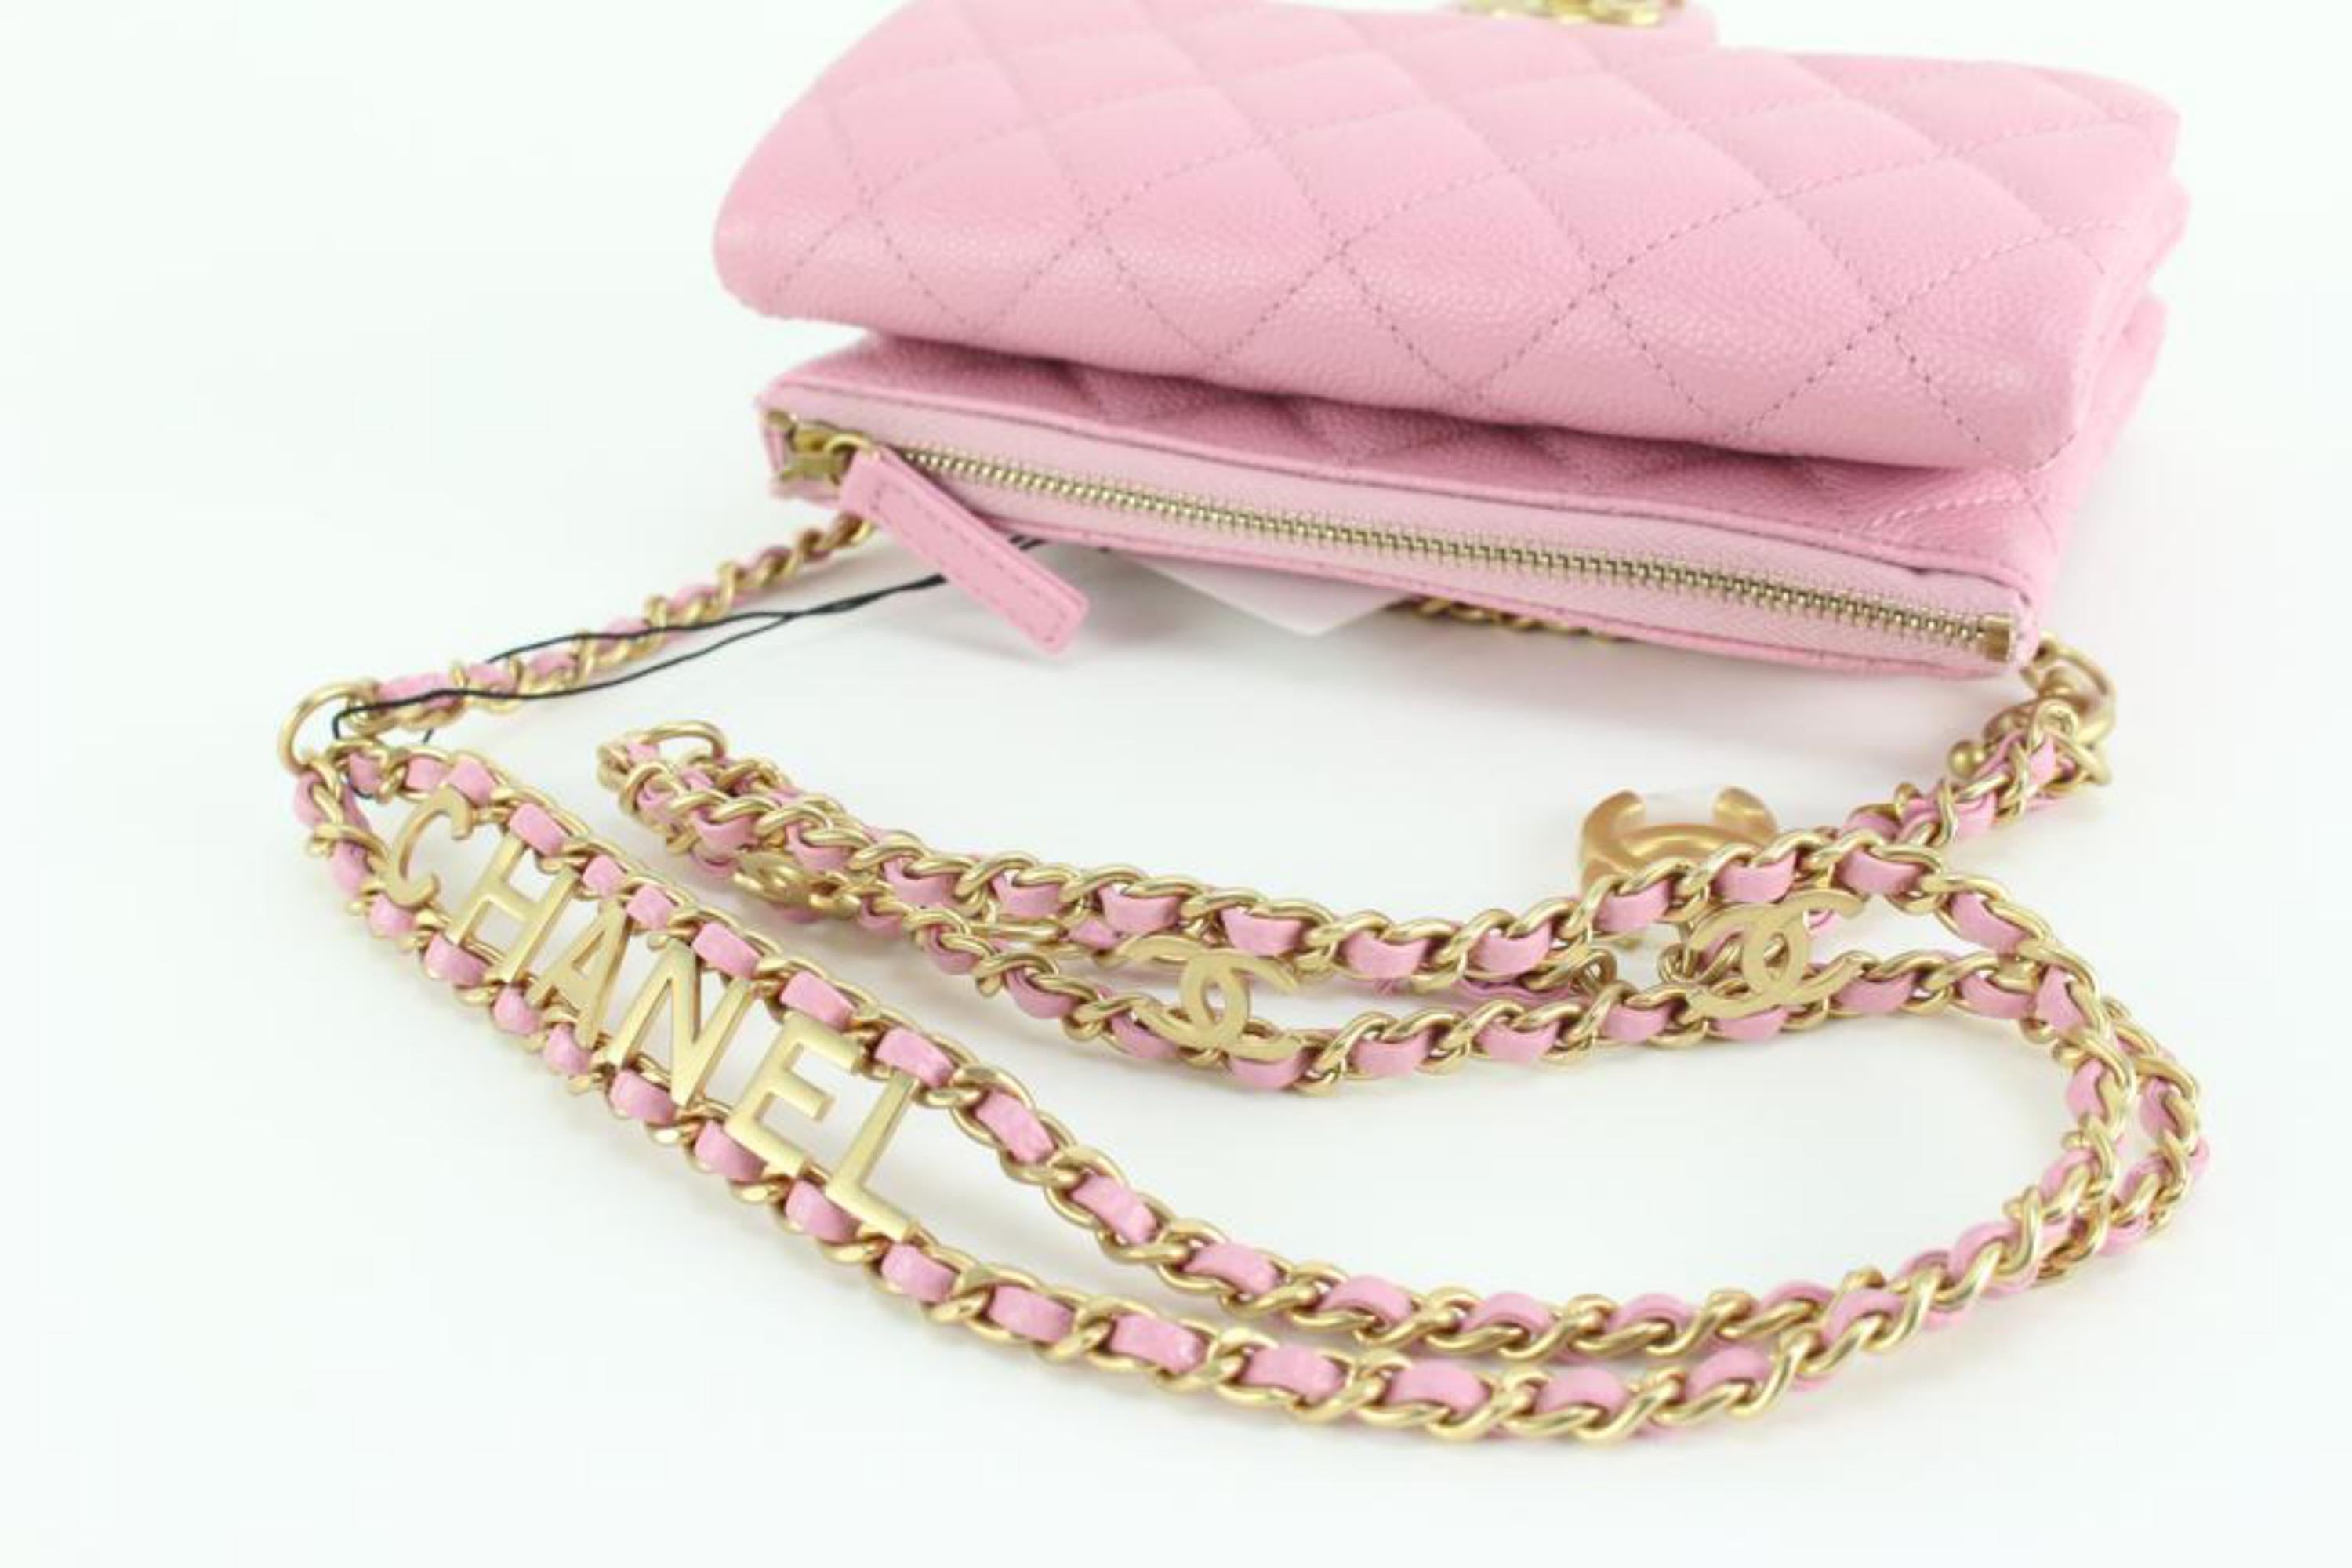 Chanel 22S Dark Pink Quilted Caviar Mini Flap Gold Chain Bag   7cz53s 1